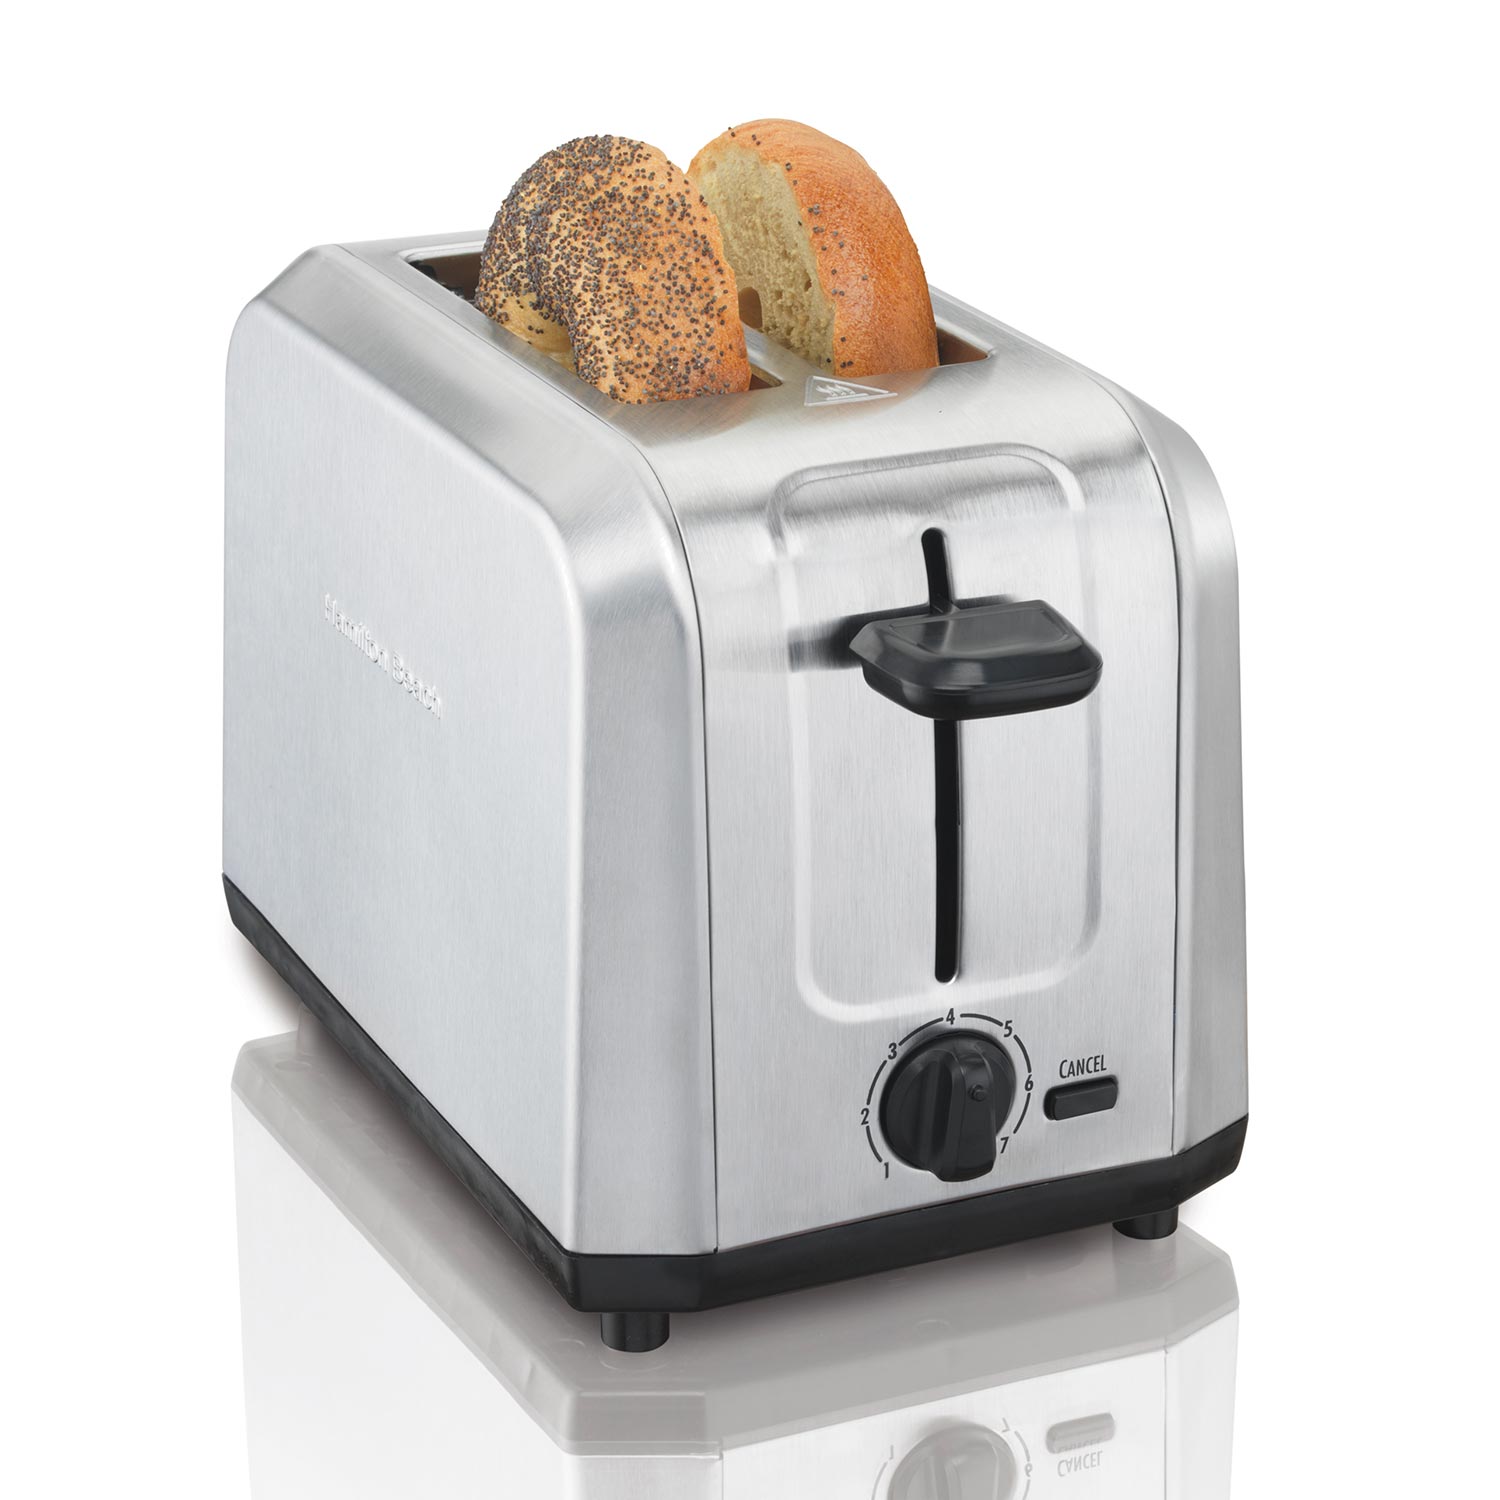 Brushed Stainless Steel 2-Slice Toaster (22910)